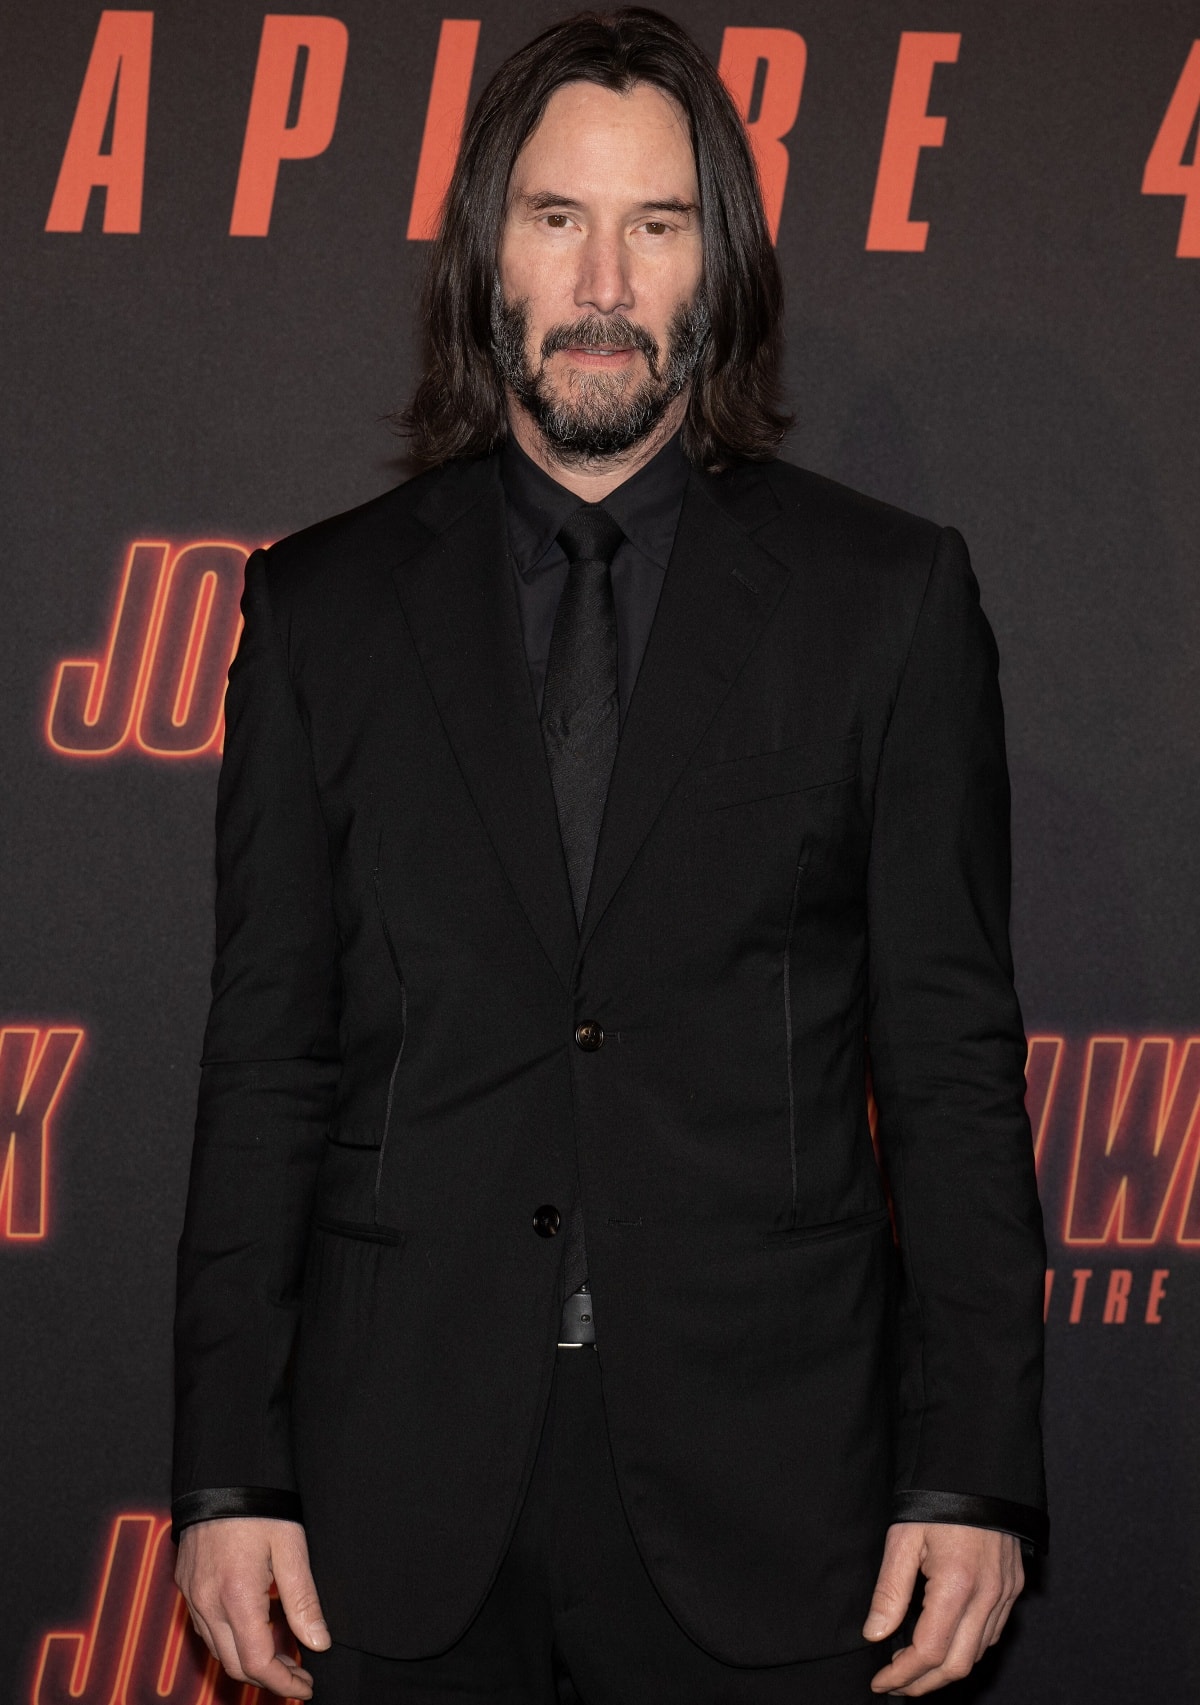 Keanu Reeves arriving in head-to-toe black at the premiere of John Wick: Chapter 4 held at Le Grand Rex in Paris